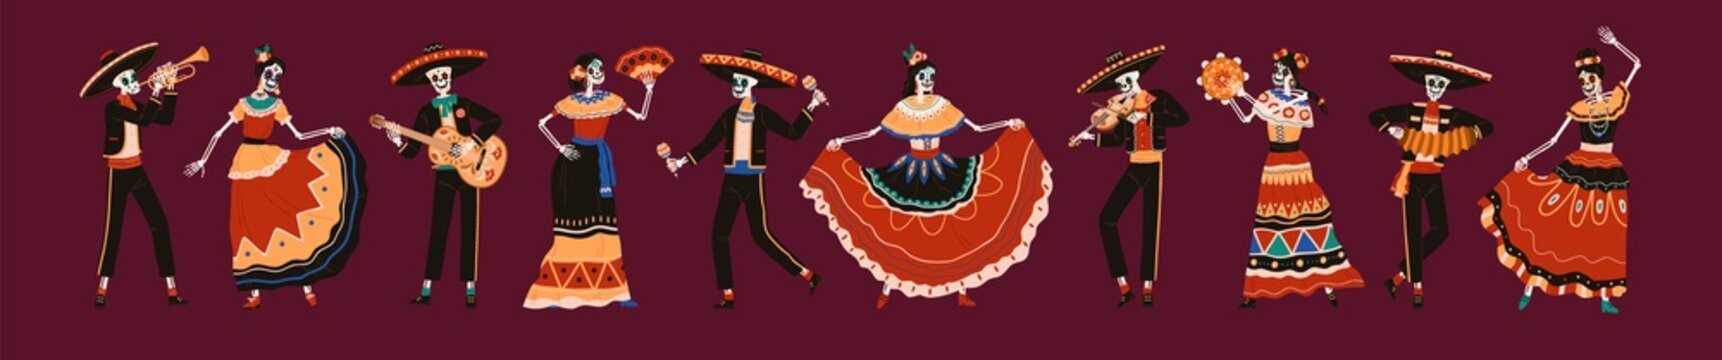 Day of the dead skeletons party set vector illustration. Skeleton characters in traditional mexican apparel dancing and playing musical instruments isolated. Dia De Los Muertos halloween festival